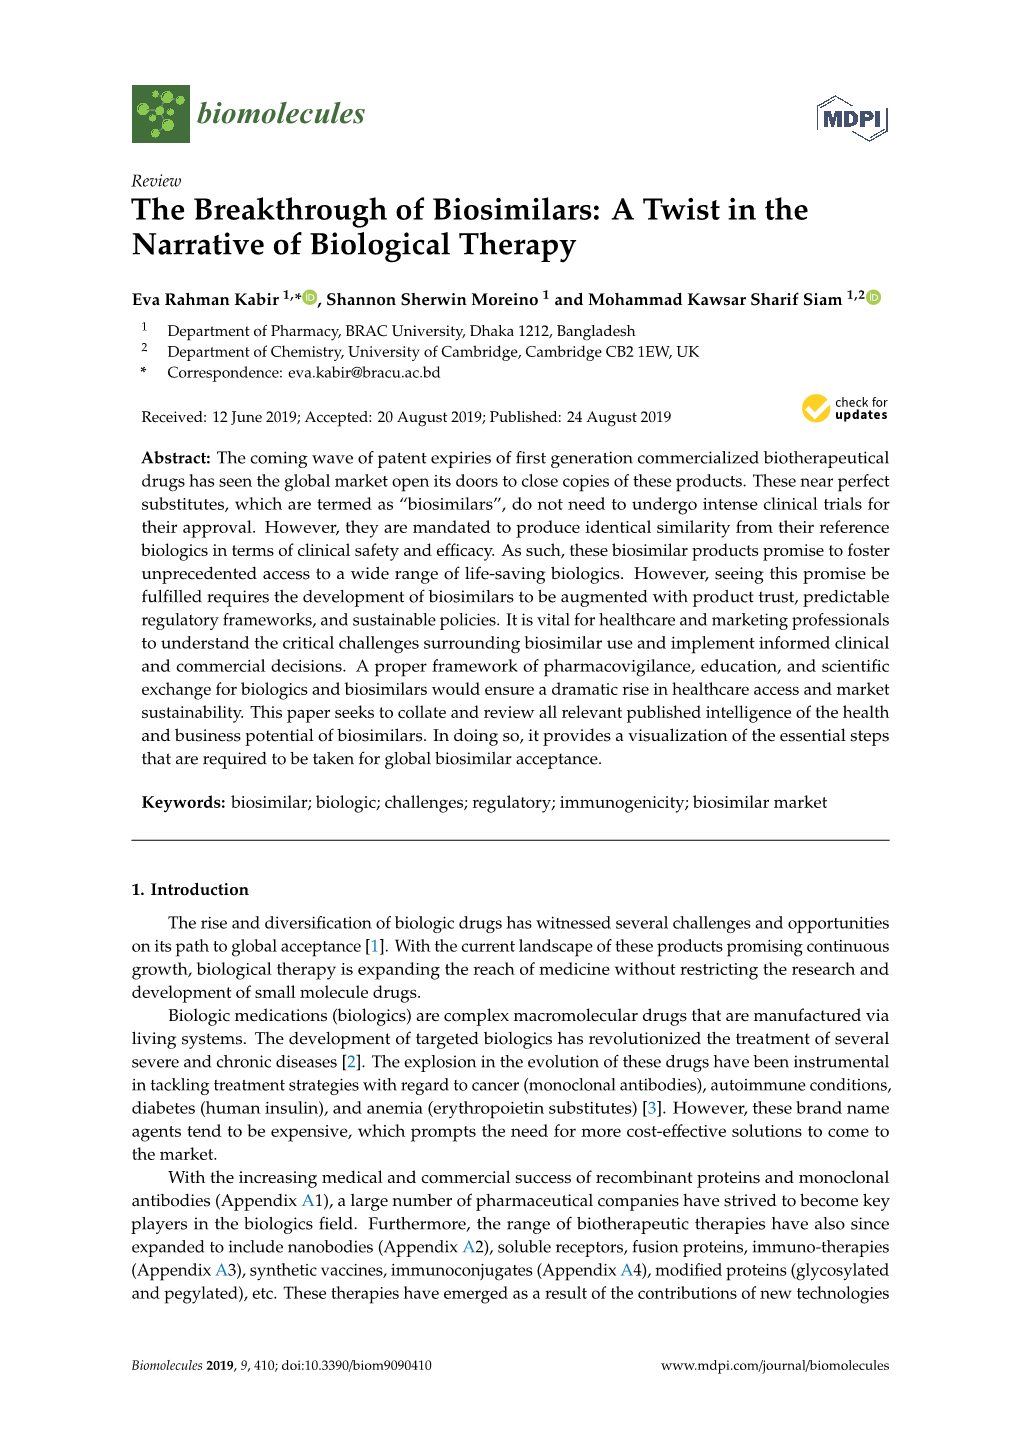 The Breakthrough of Biosimilars: a Twist in the Narrative of Biological Therapy